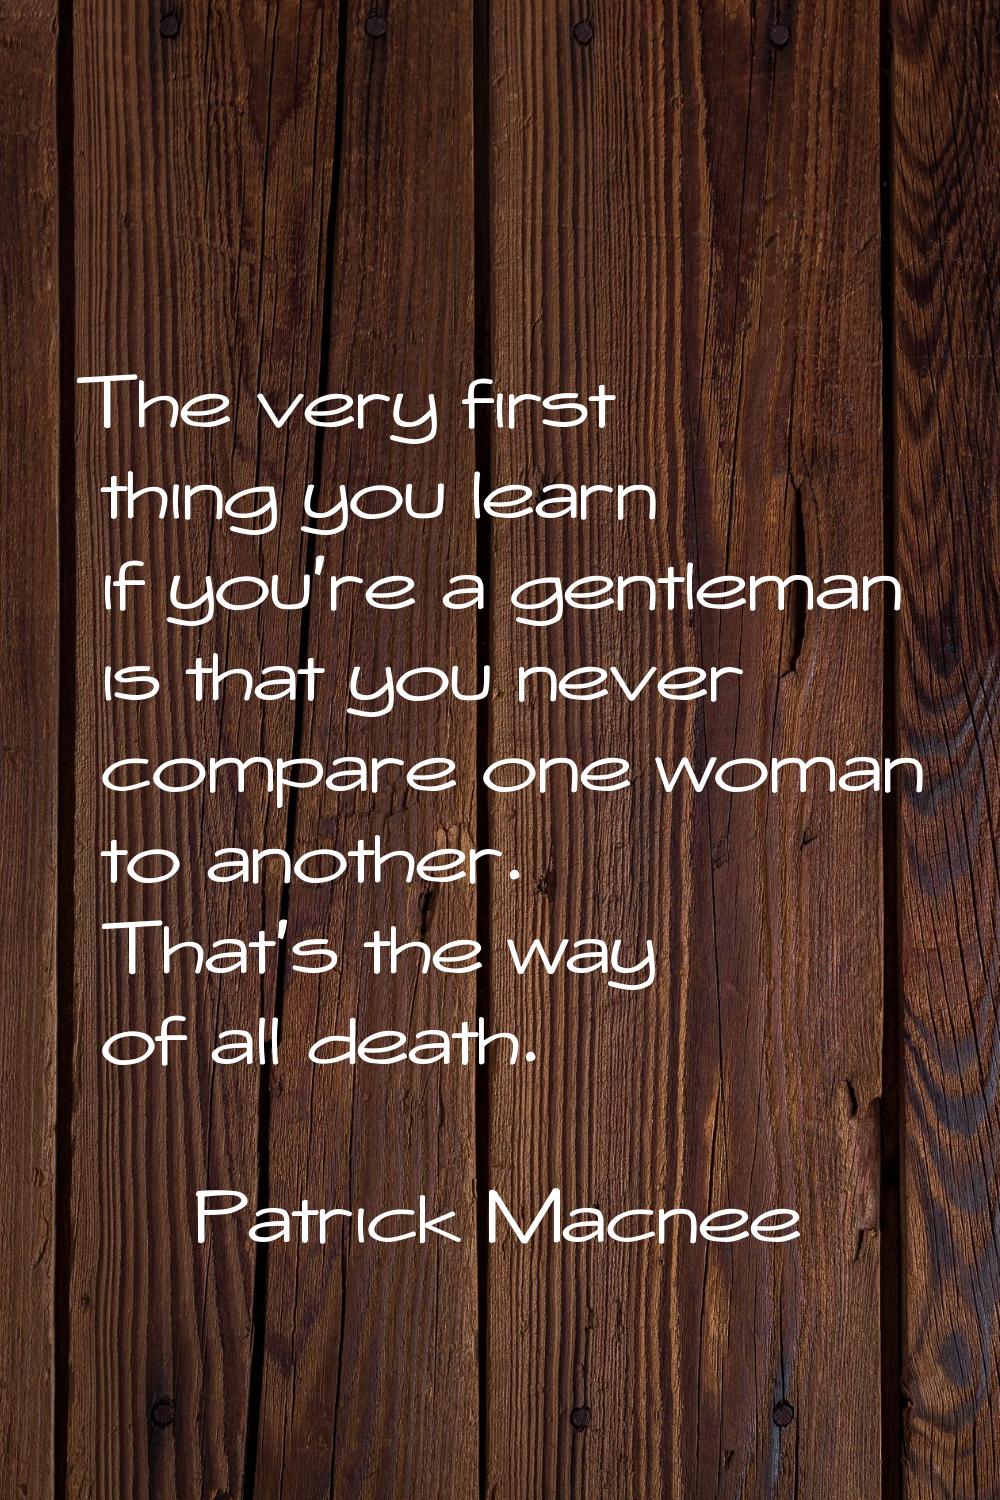 The very first thing you learn if you're a gentleman is that you never compare one woman to another